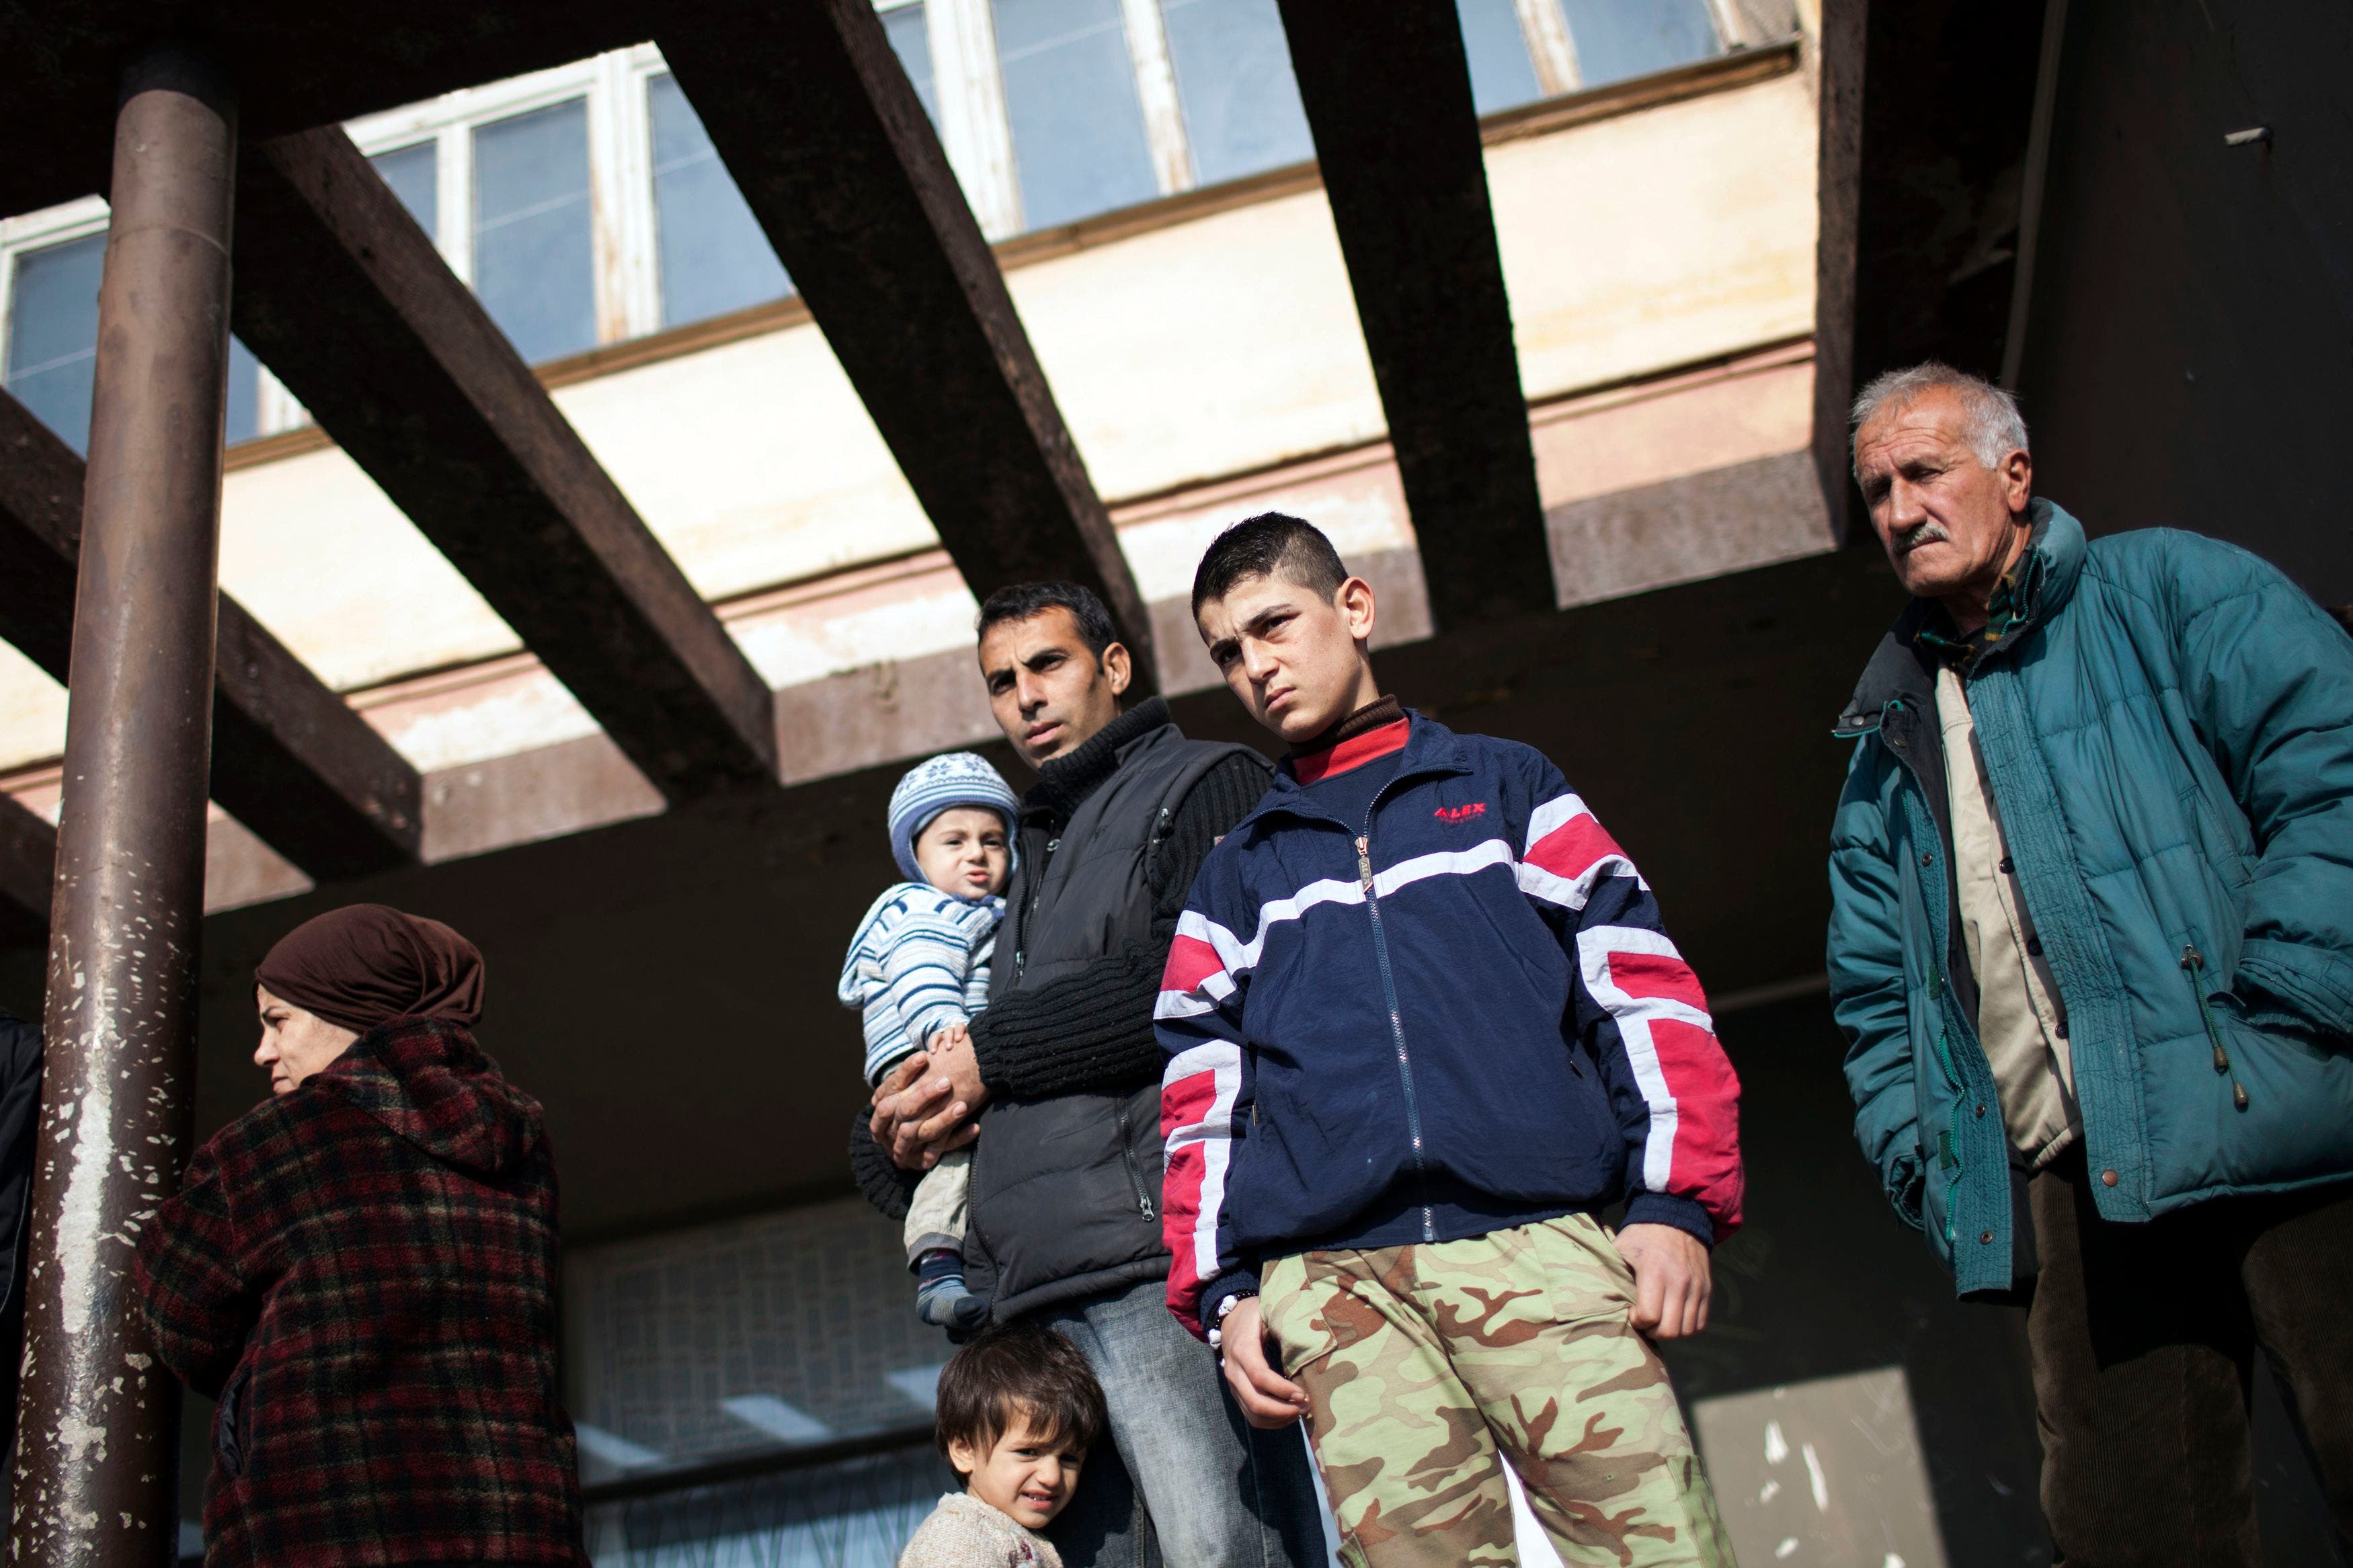 Syrian refugees in Bulgaria